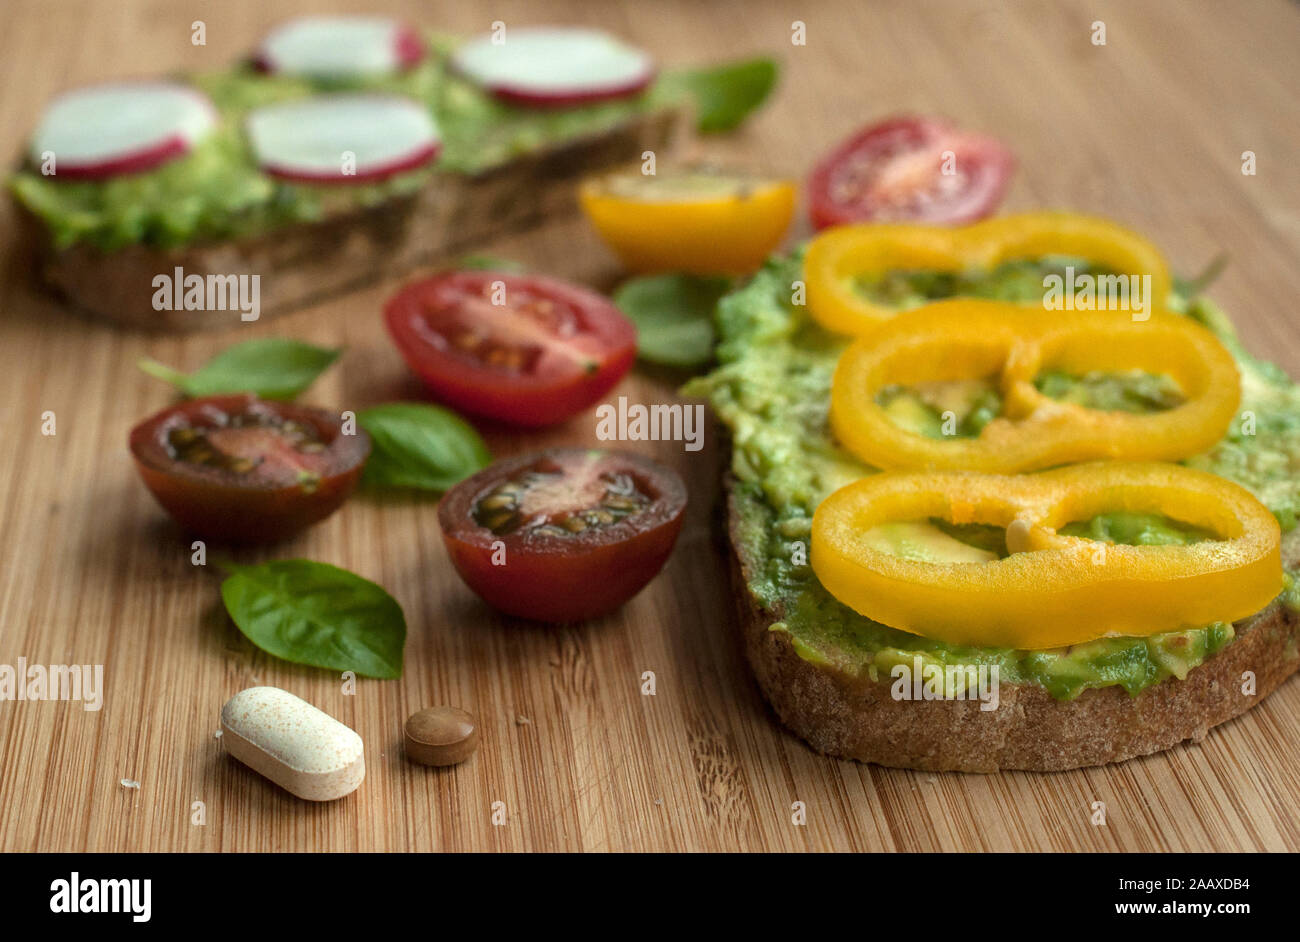 Supplements as part of a natural and balanced diet. Pills and food served together. Future of nutrition. Stock Photo